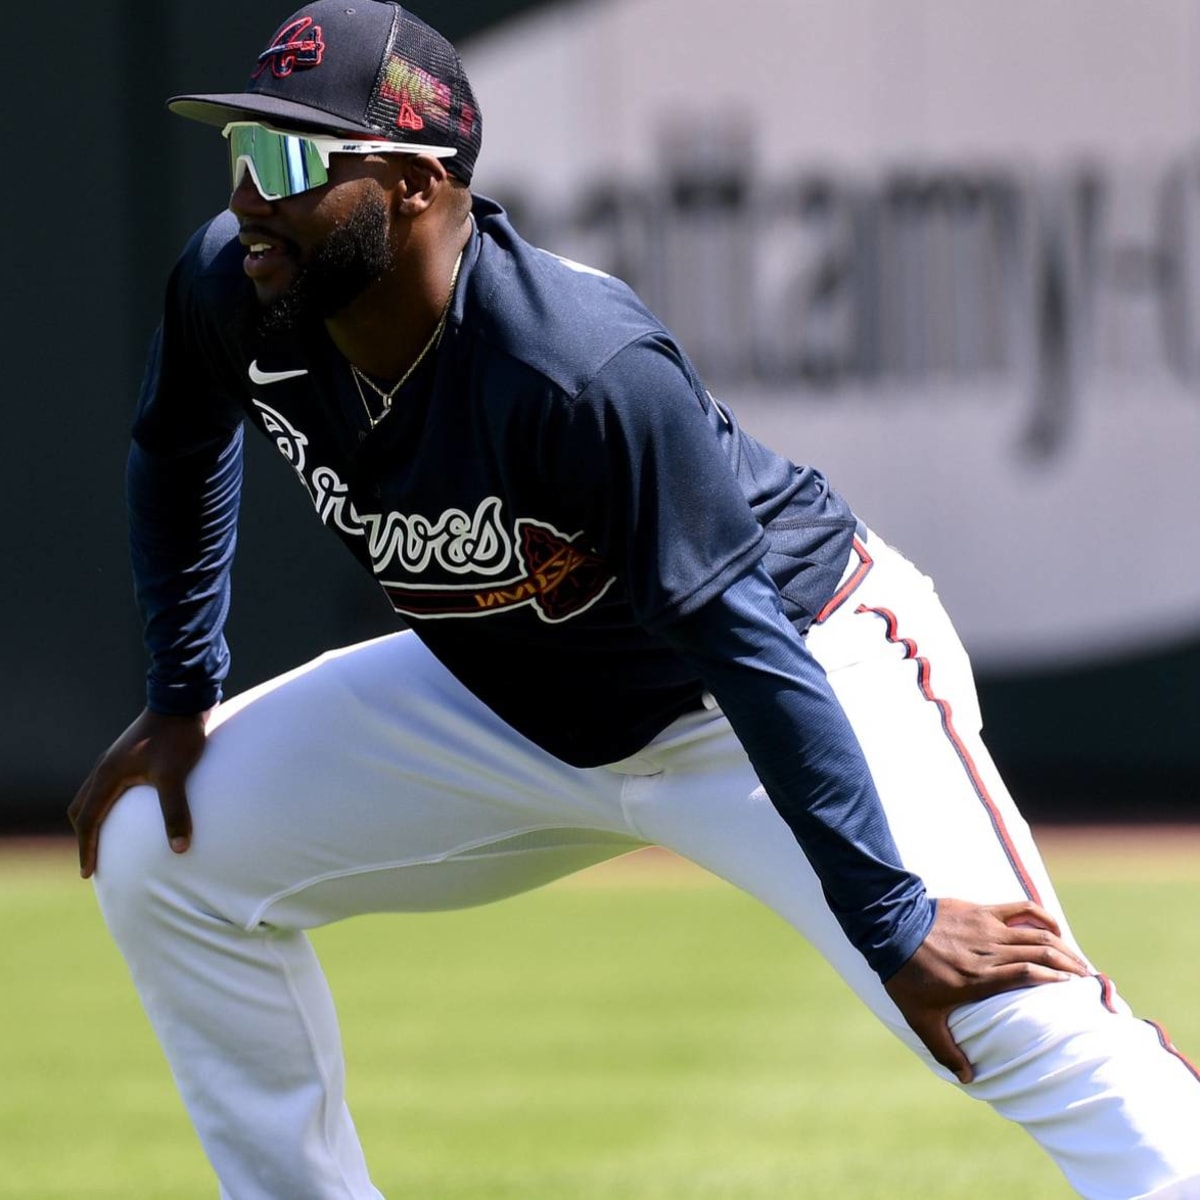 Braves Call Up Top Prospect Michael Harris II Ahead of Marlins